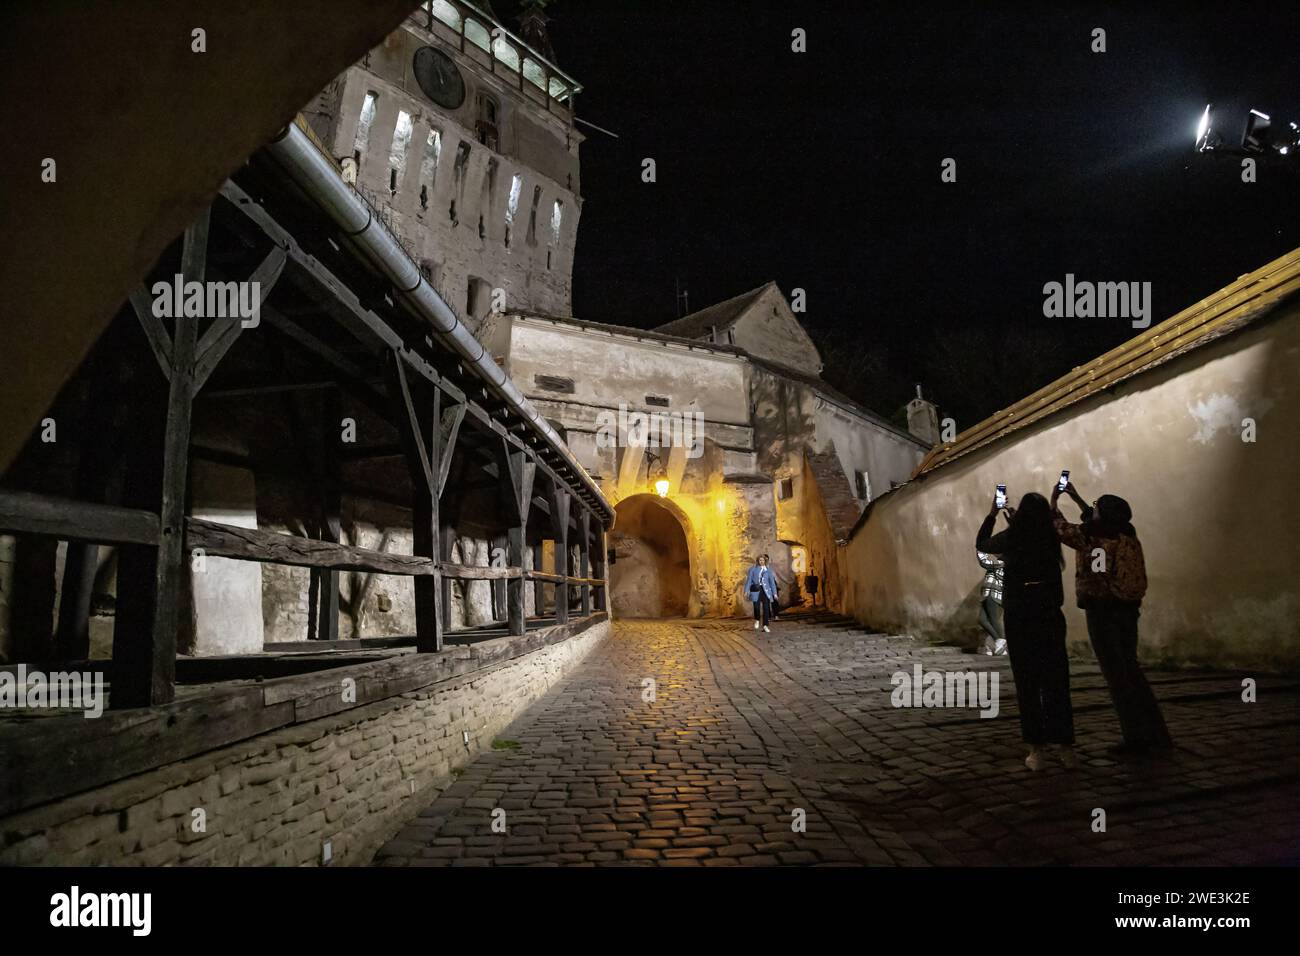 SIGHISOARA, ROMANIA - MAY 1, 2023: Unidentified tourists photograph the Clock Tower gate to the citadel of the medieval city at night. Stock Photo